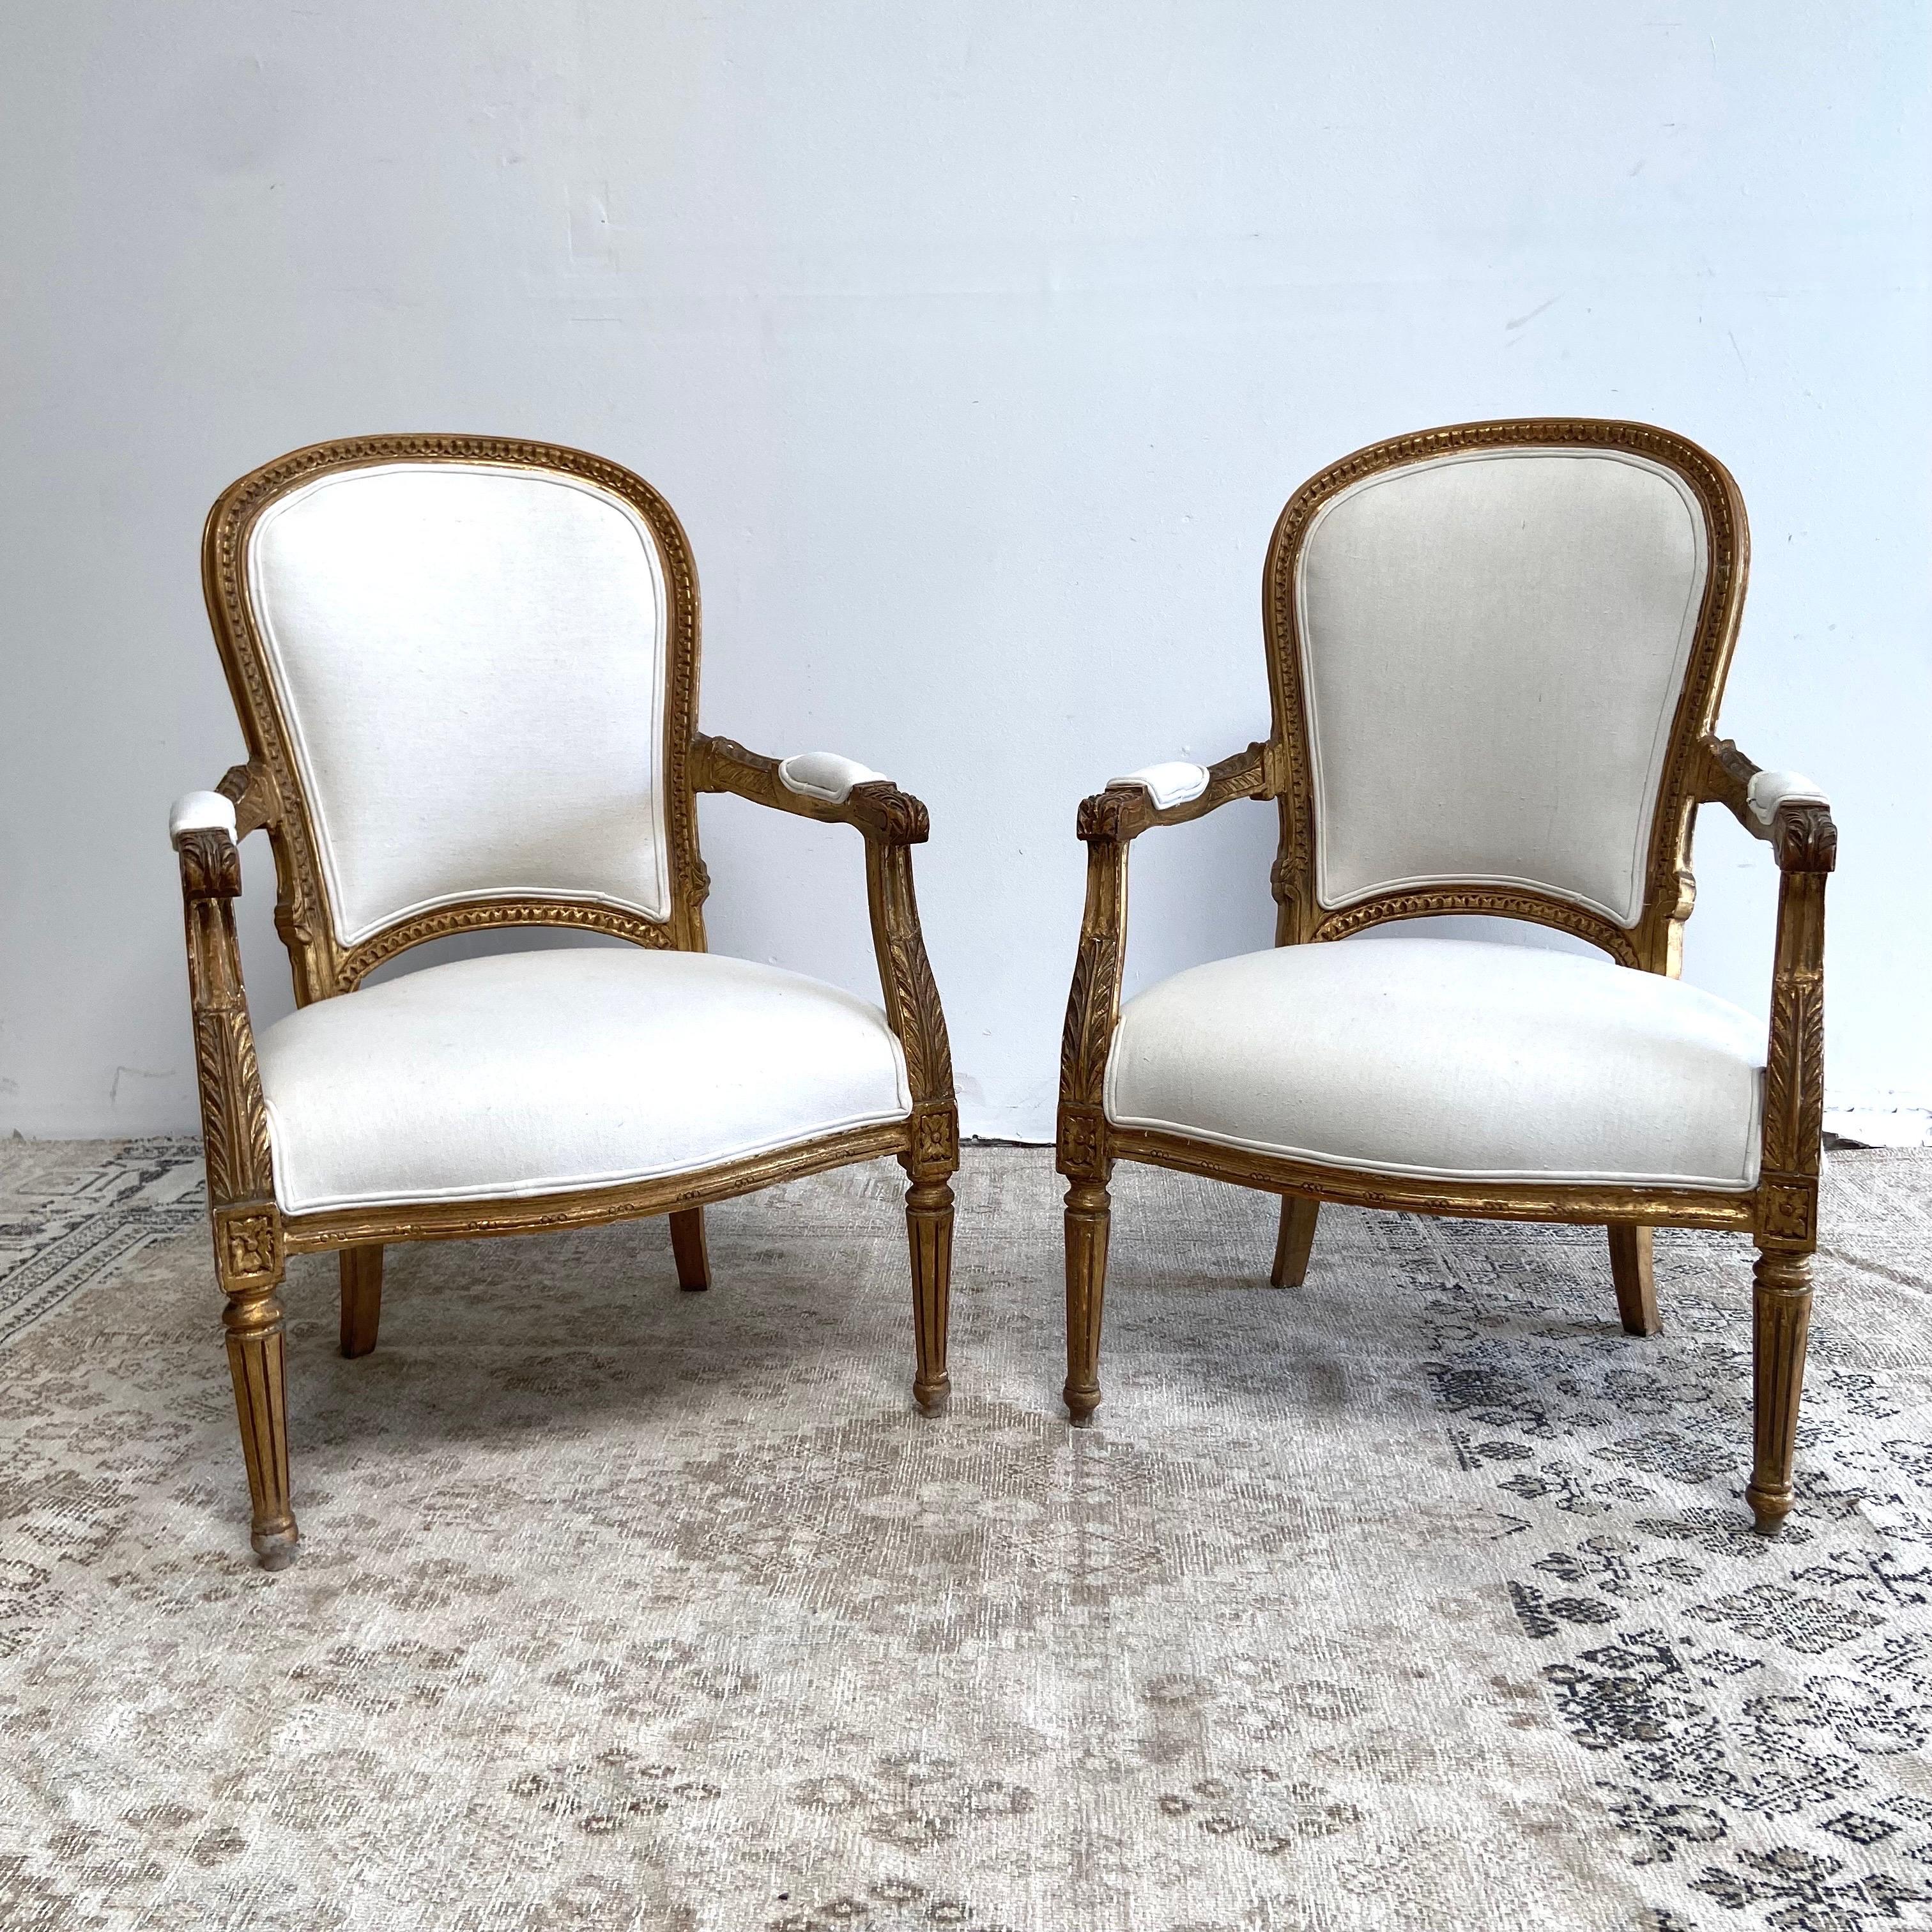 Pair of chairs 
Original finish, with new upholstery in linen with a burlap back.  Sturdy ready for daily use.  Great for accent chairs, vanity chairs, or dining room.
Size: 27”w x 27”d x 39”h
SH: 17”. SD:21”. AH: 25”